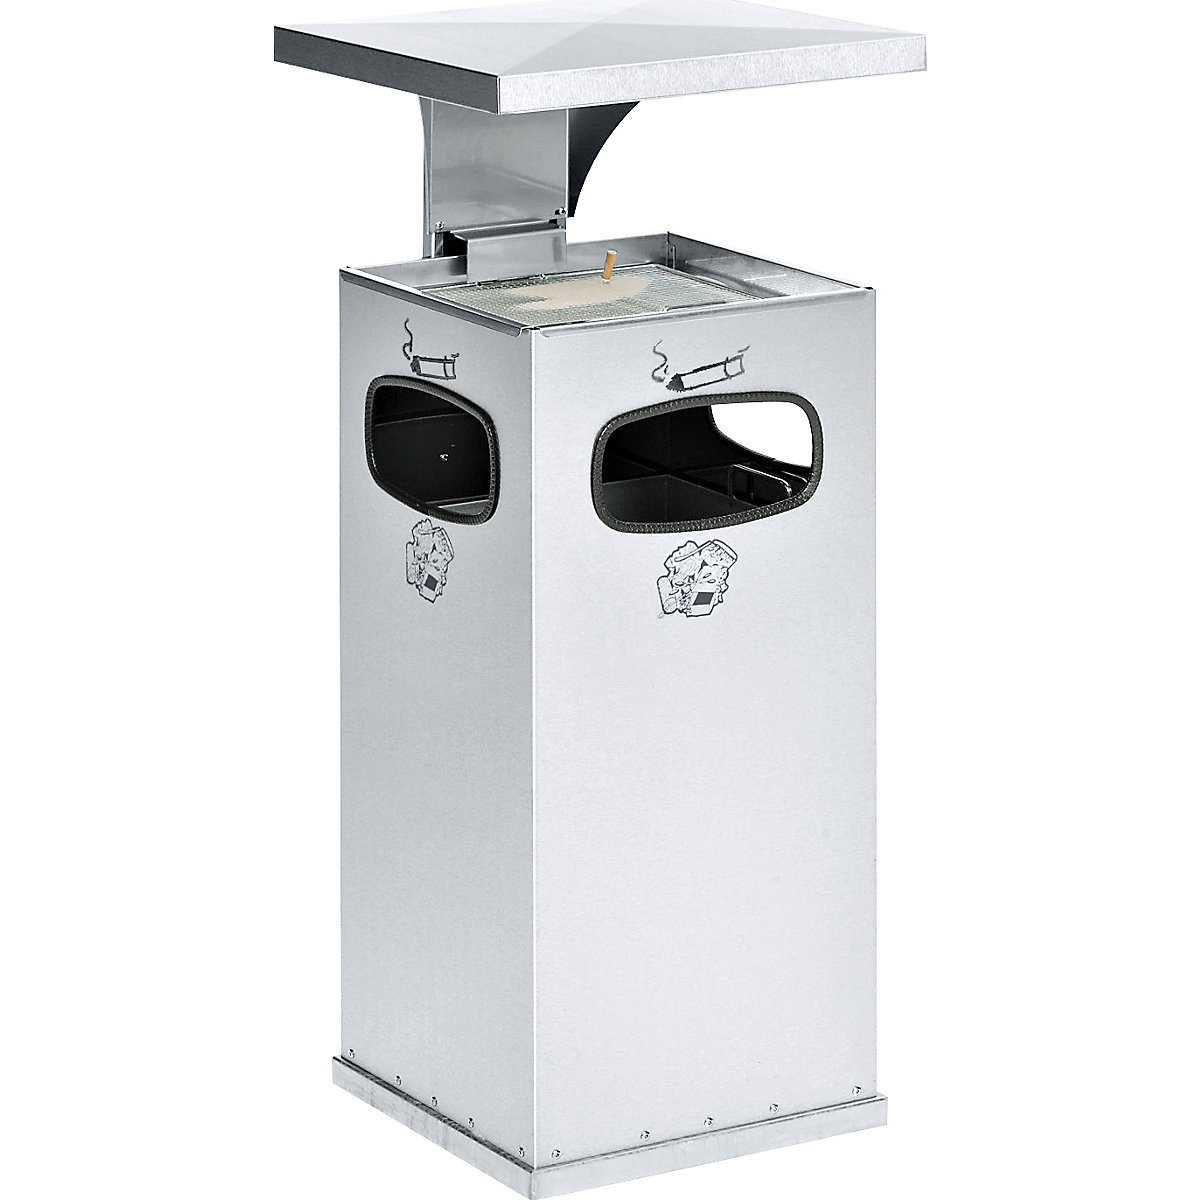 Waste collector with ashtray insert – VAR